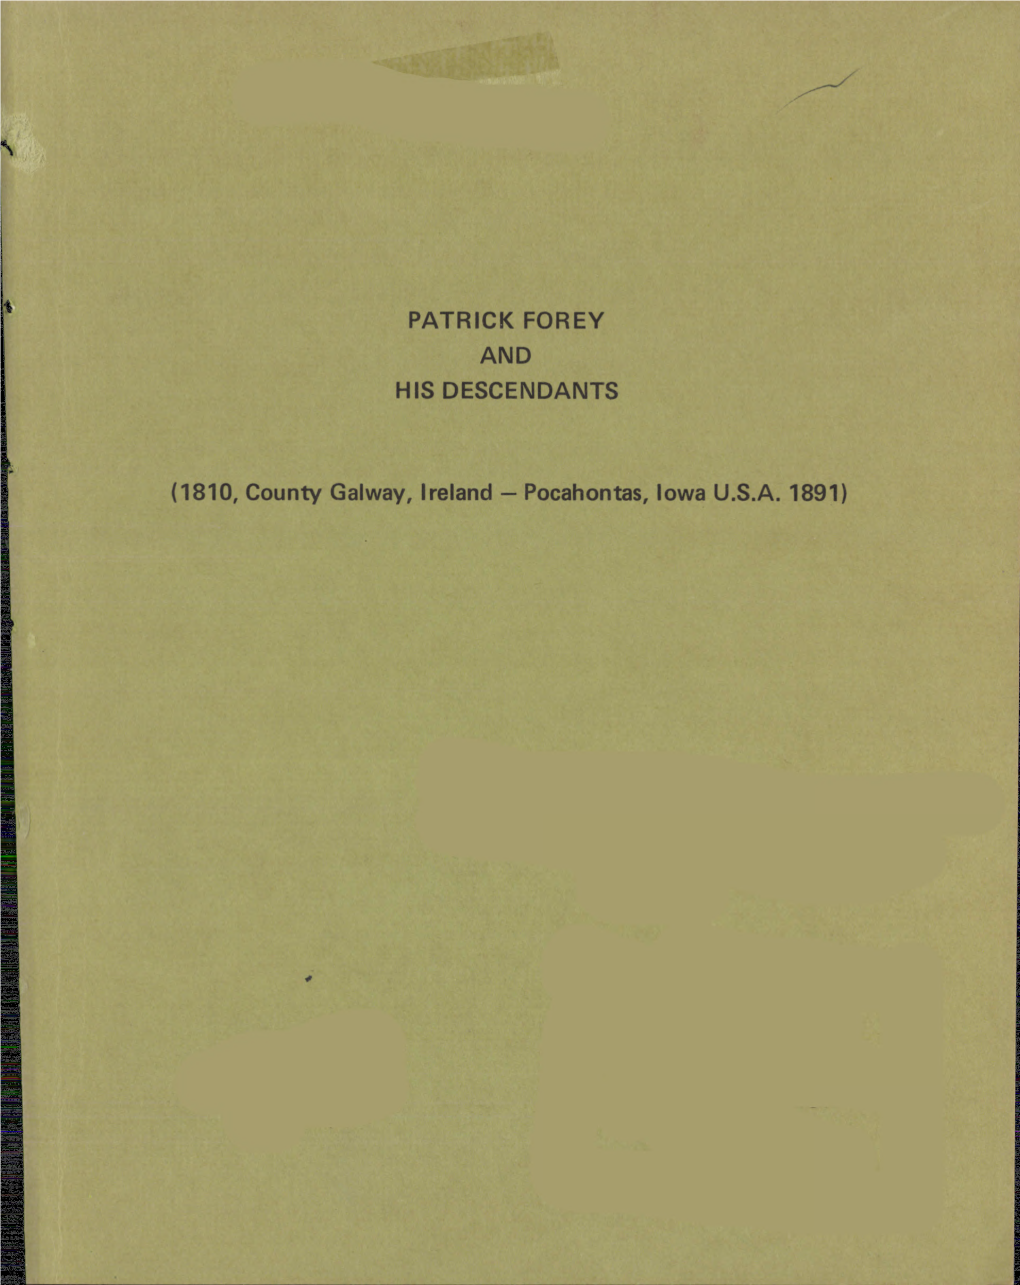 Patrick Forey and His Descendants : 1810, County Galway, Ireland